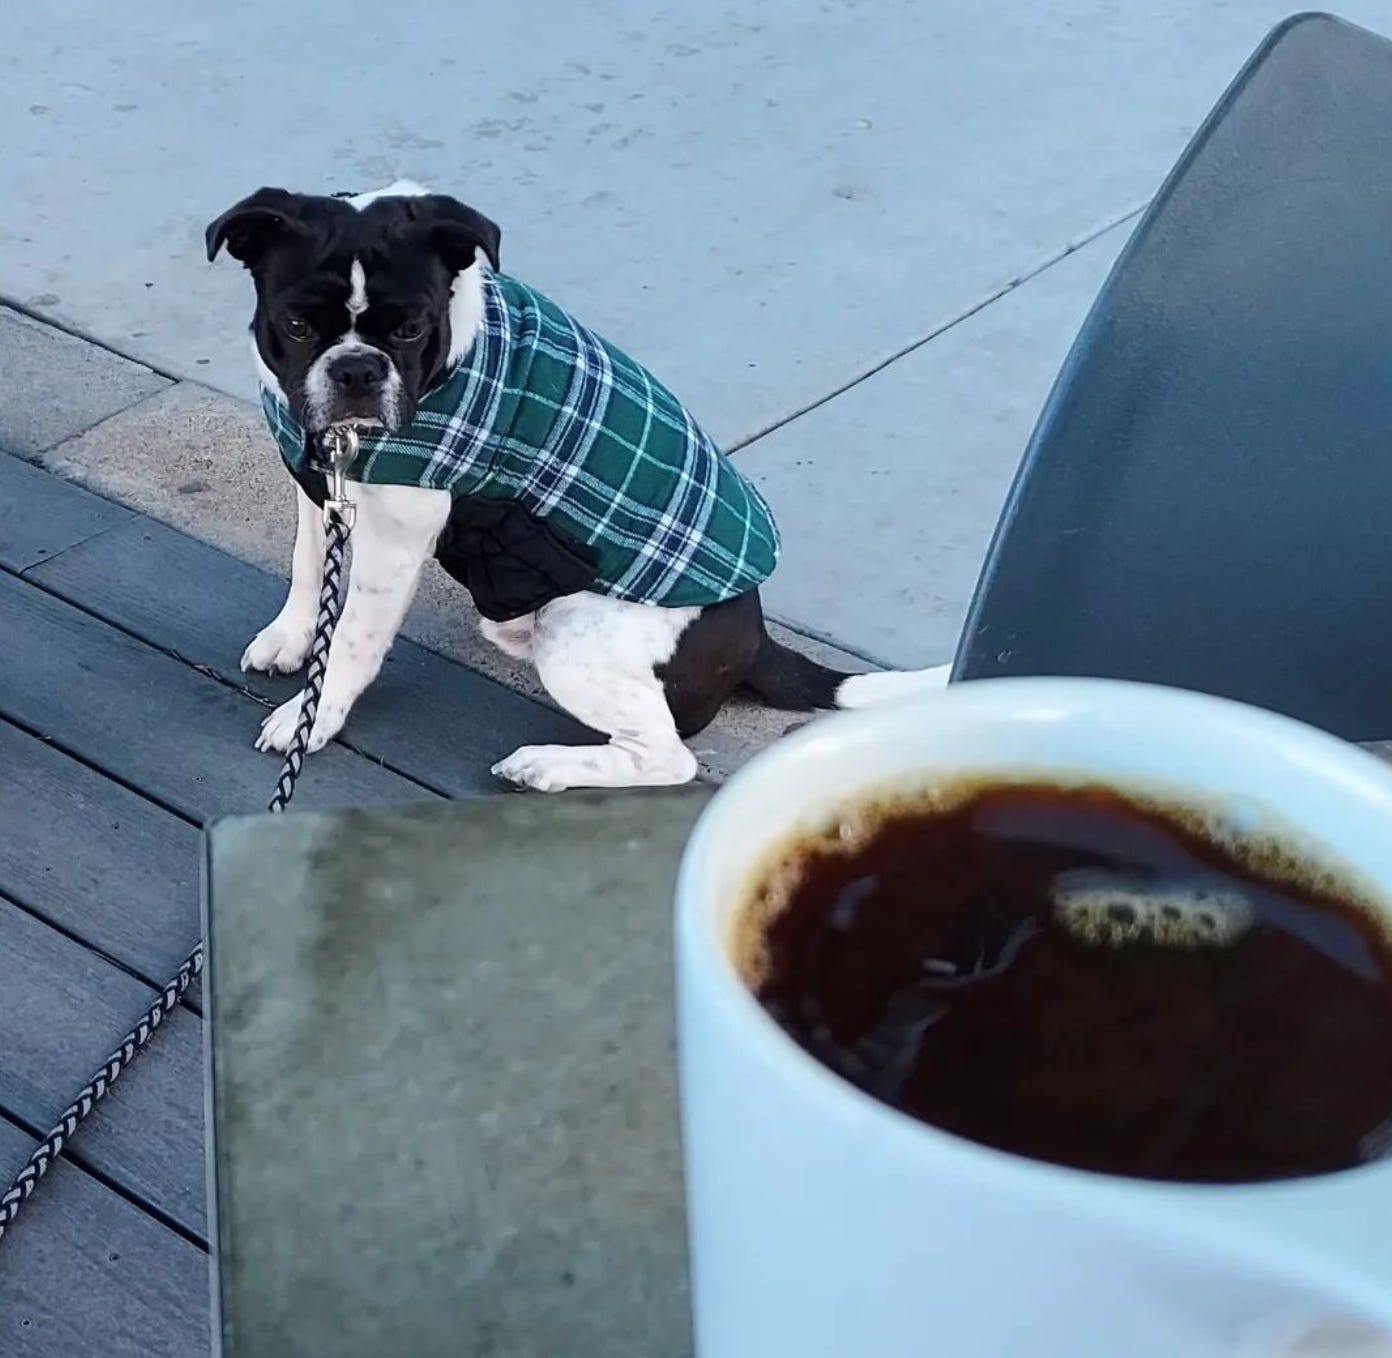 A small black and white dog whearing a green and blue flannel doggie coat sits on the sidewalk. He has turned his head to look at the camera where a cup of coffee is steaming in the foreground.